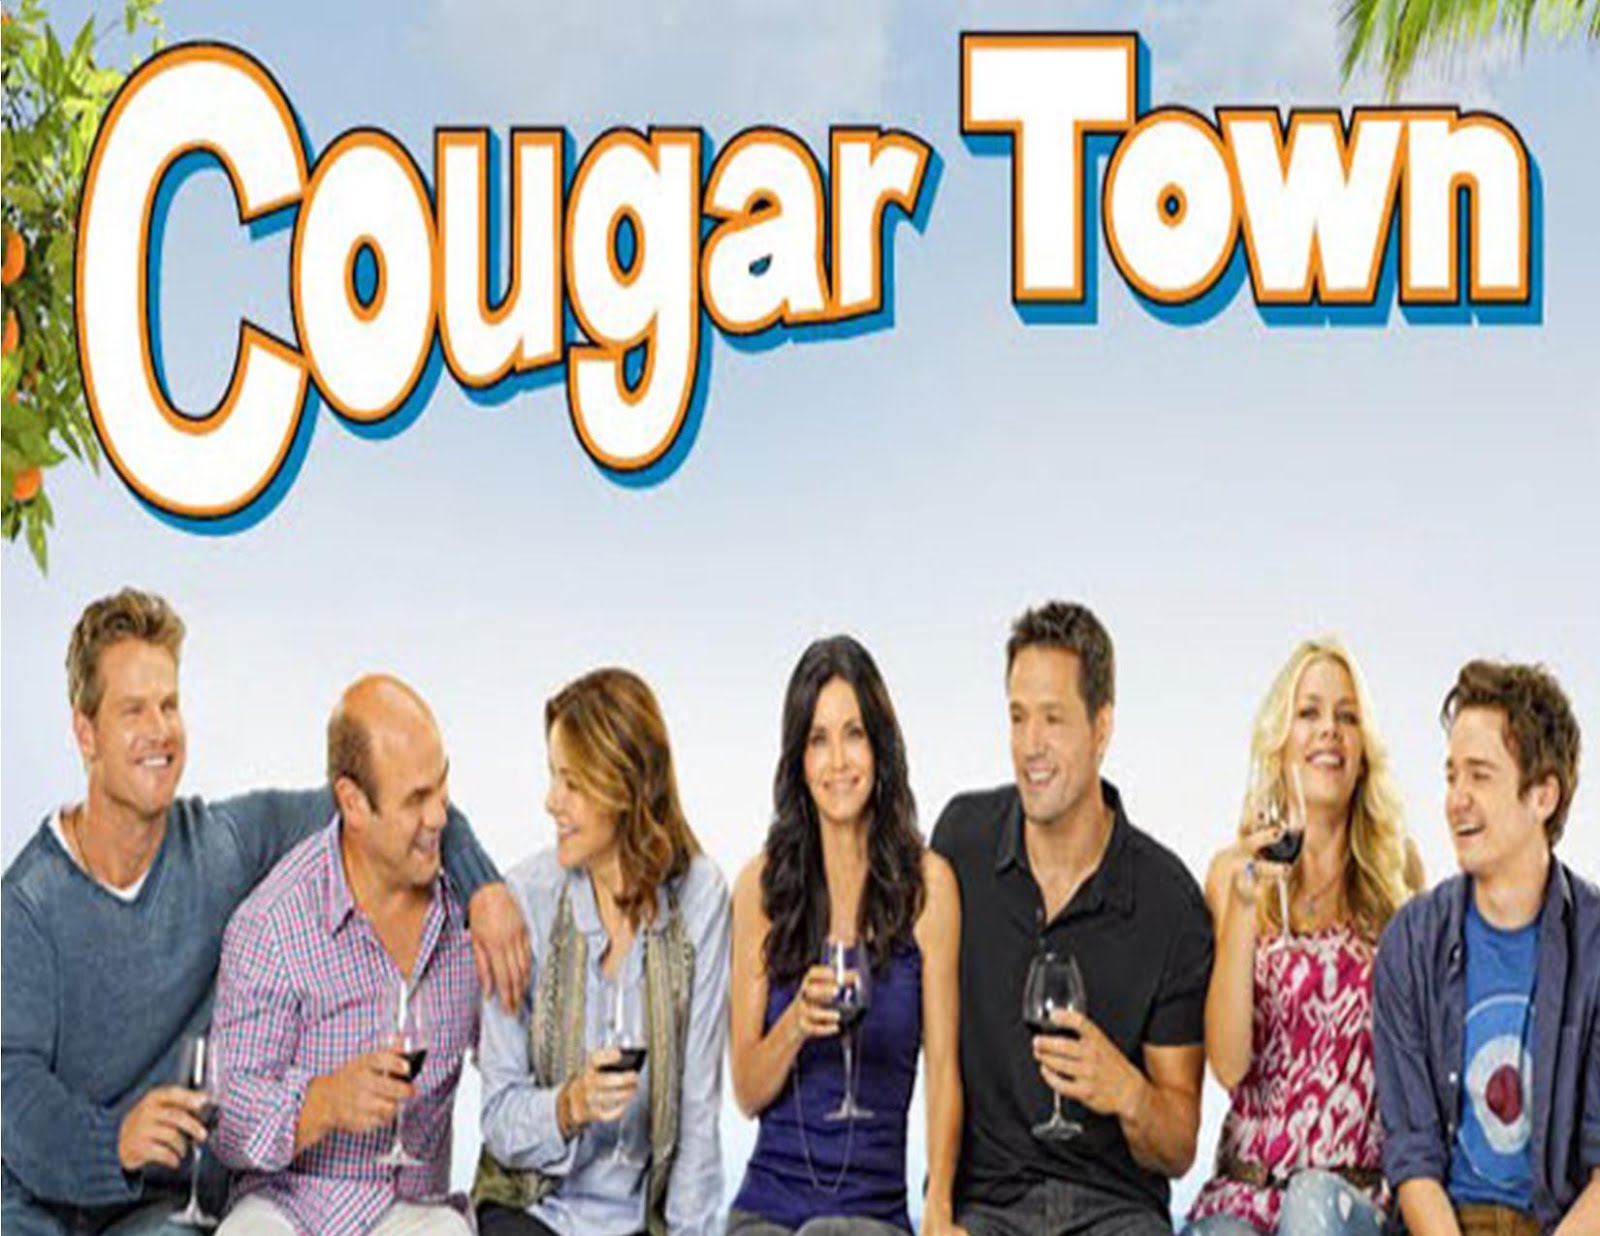 You Watch Any Hot Series Online Watch It Full S04e01 Cougar Town Season 4 Episode 1 Online Stream